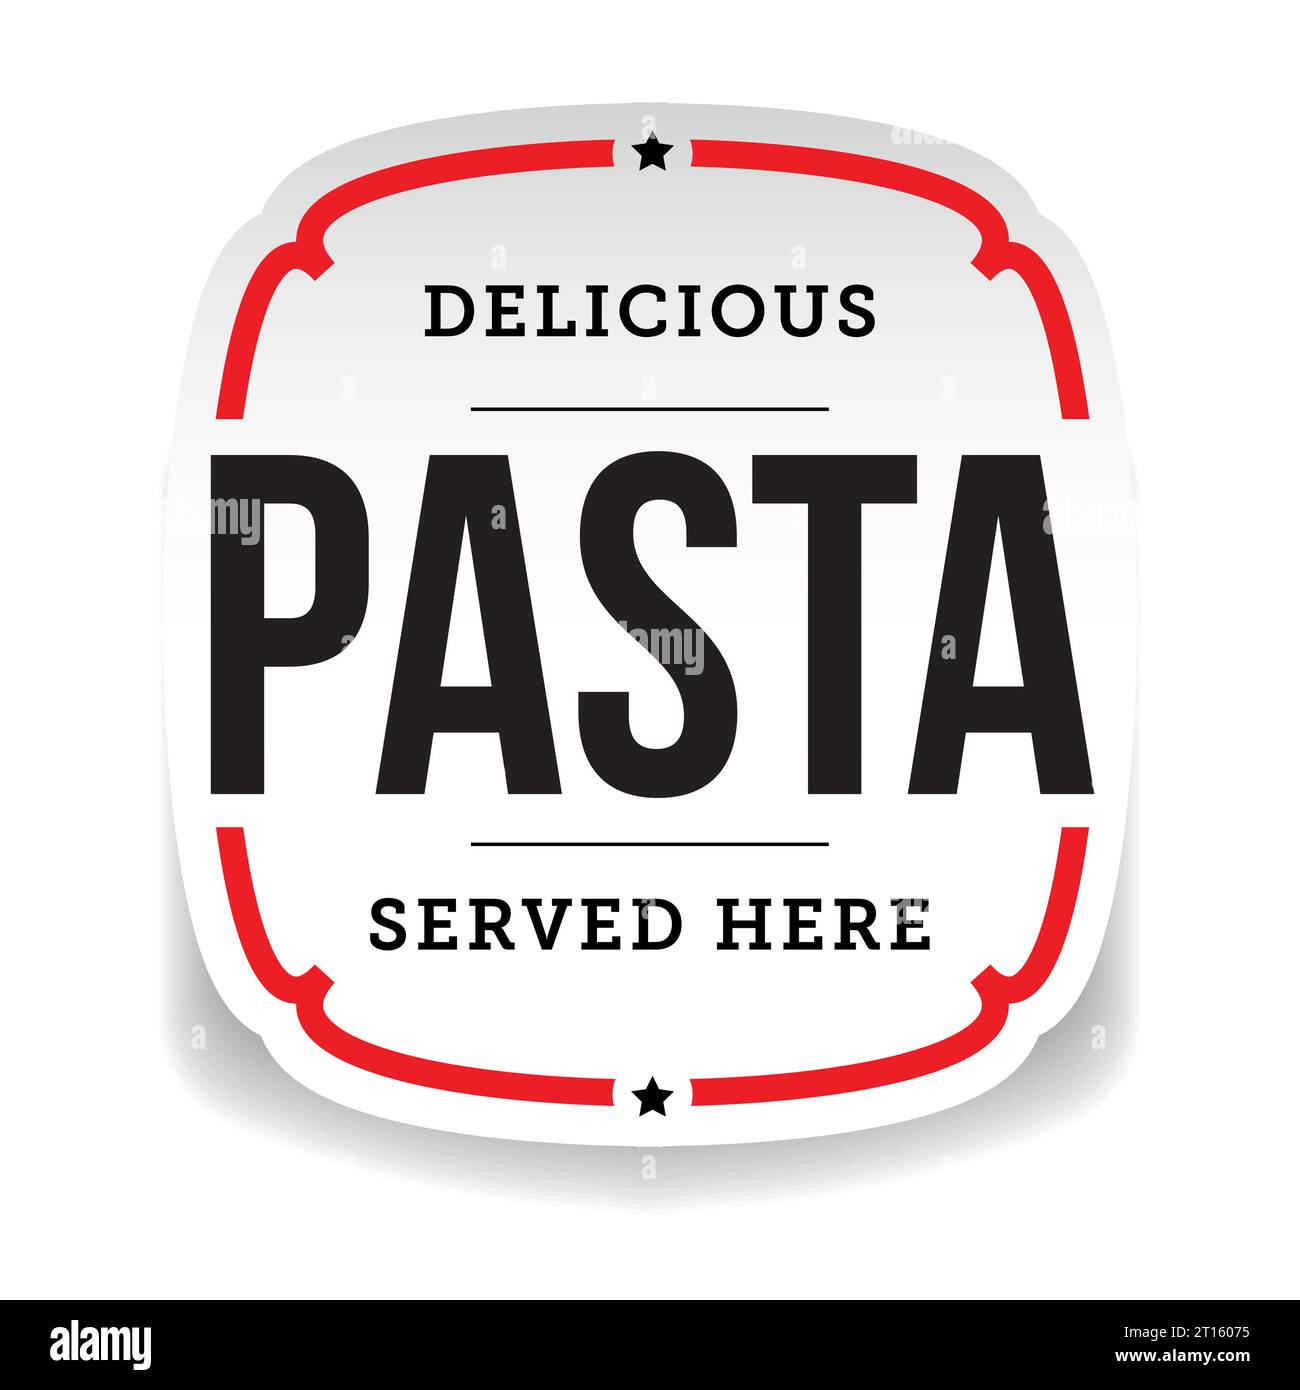 Delicious Pasta Served here vintage label Stock Vector